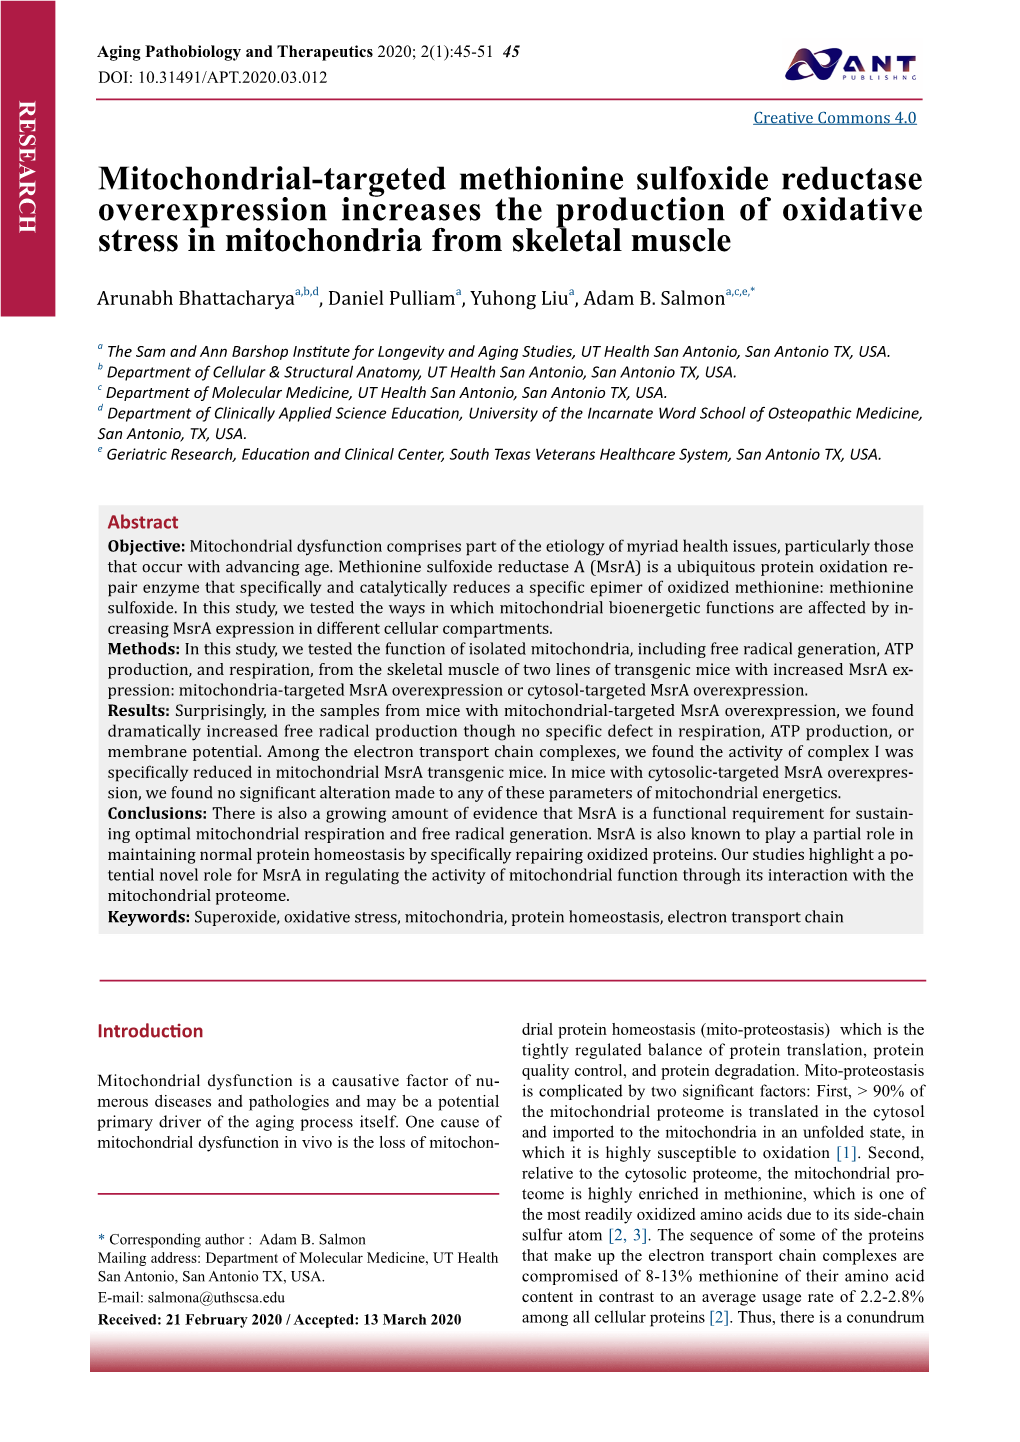 Mitochondrial-Targeted Methionine Sulfoxide Reductase Overexpression Increases the Production of Oxidative Stress in Mitochondria from Skeletal Muscle